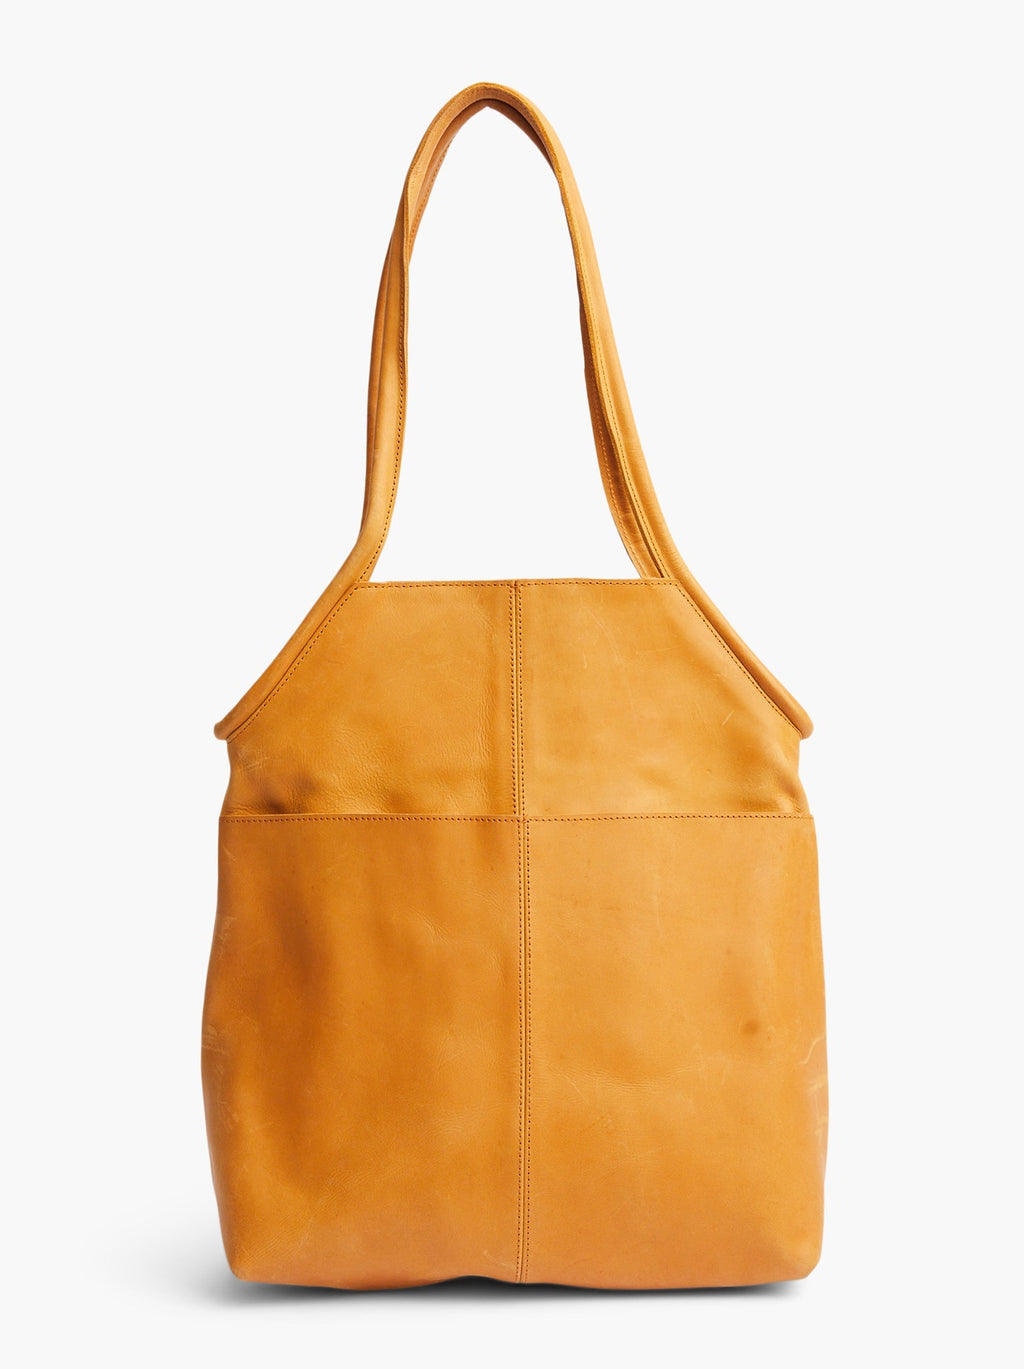 Able Meskel Tote - Provisions Mercantile